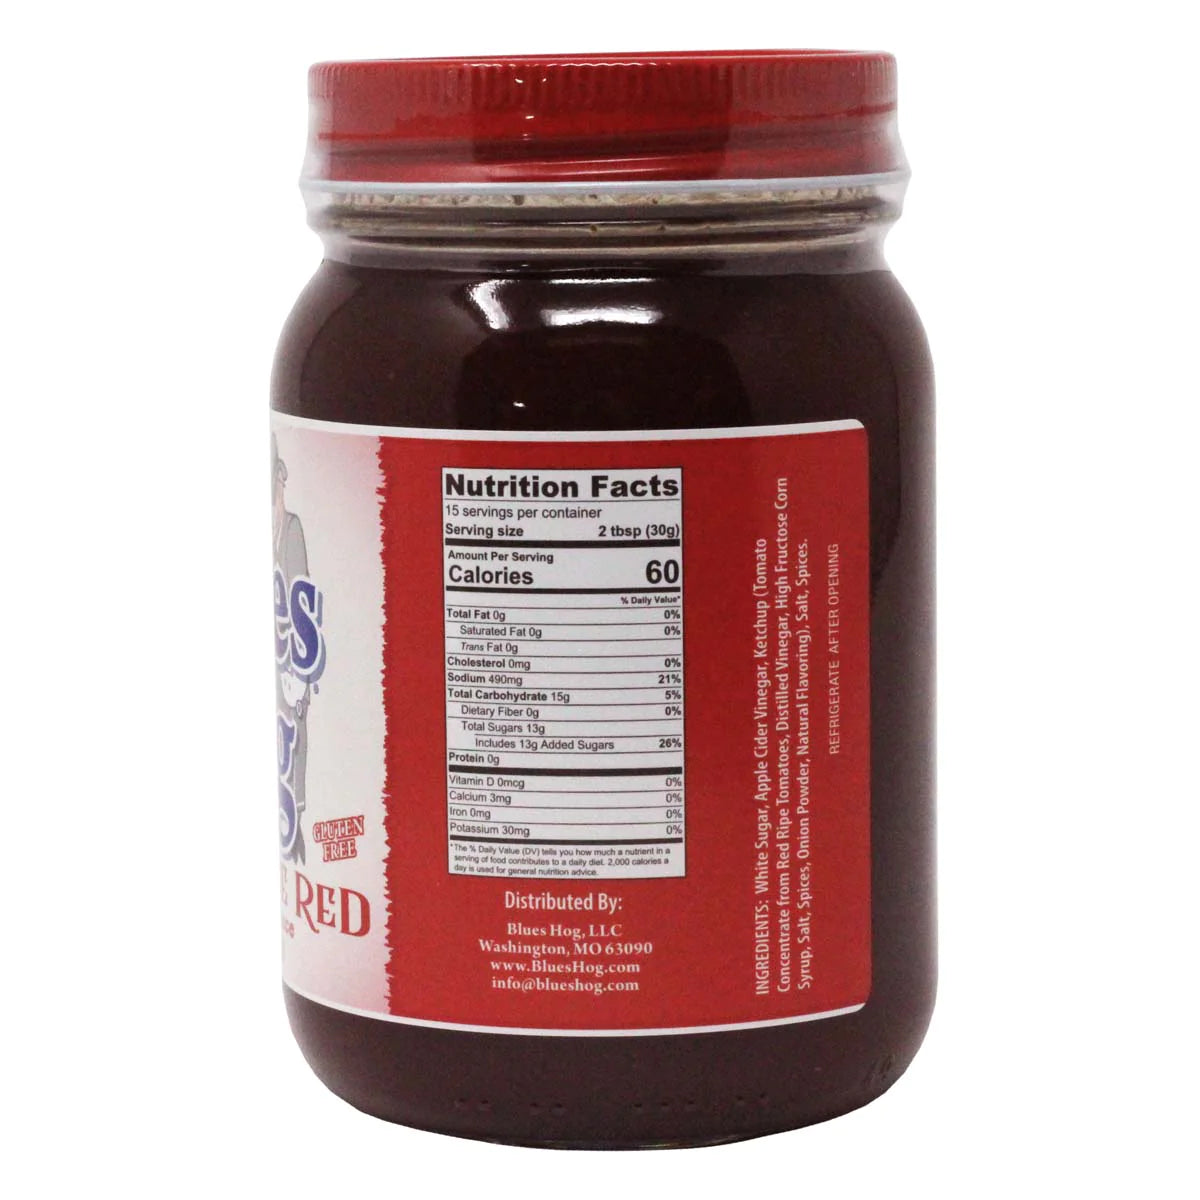 Blues Hog Tennessee Red Barbecue Sauce